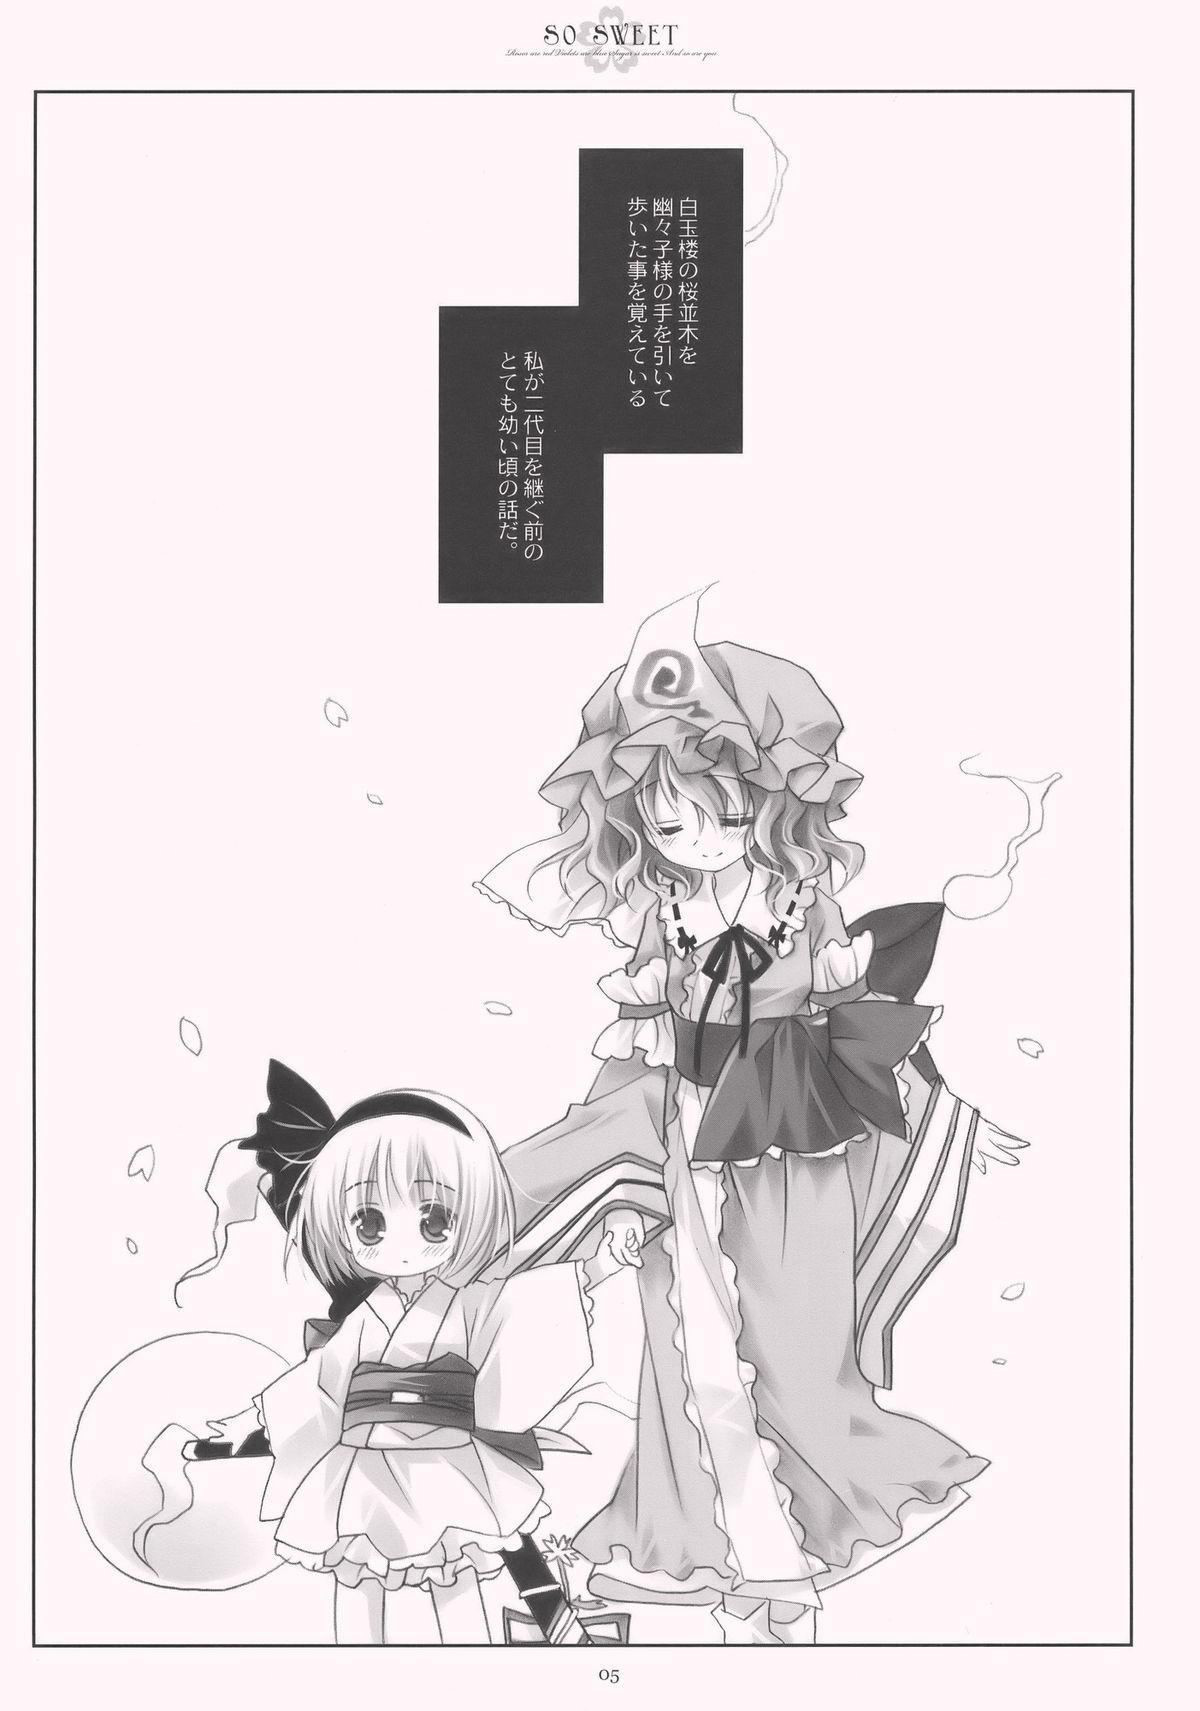 Sexcams SO SWEET - Touhou project Slim - Page 5